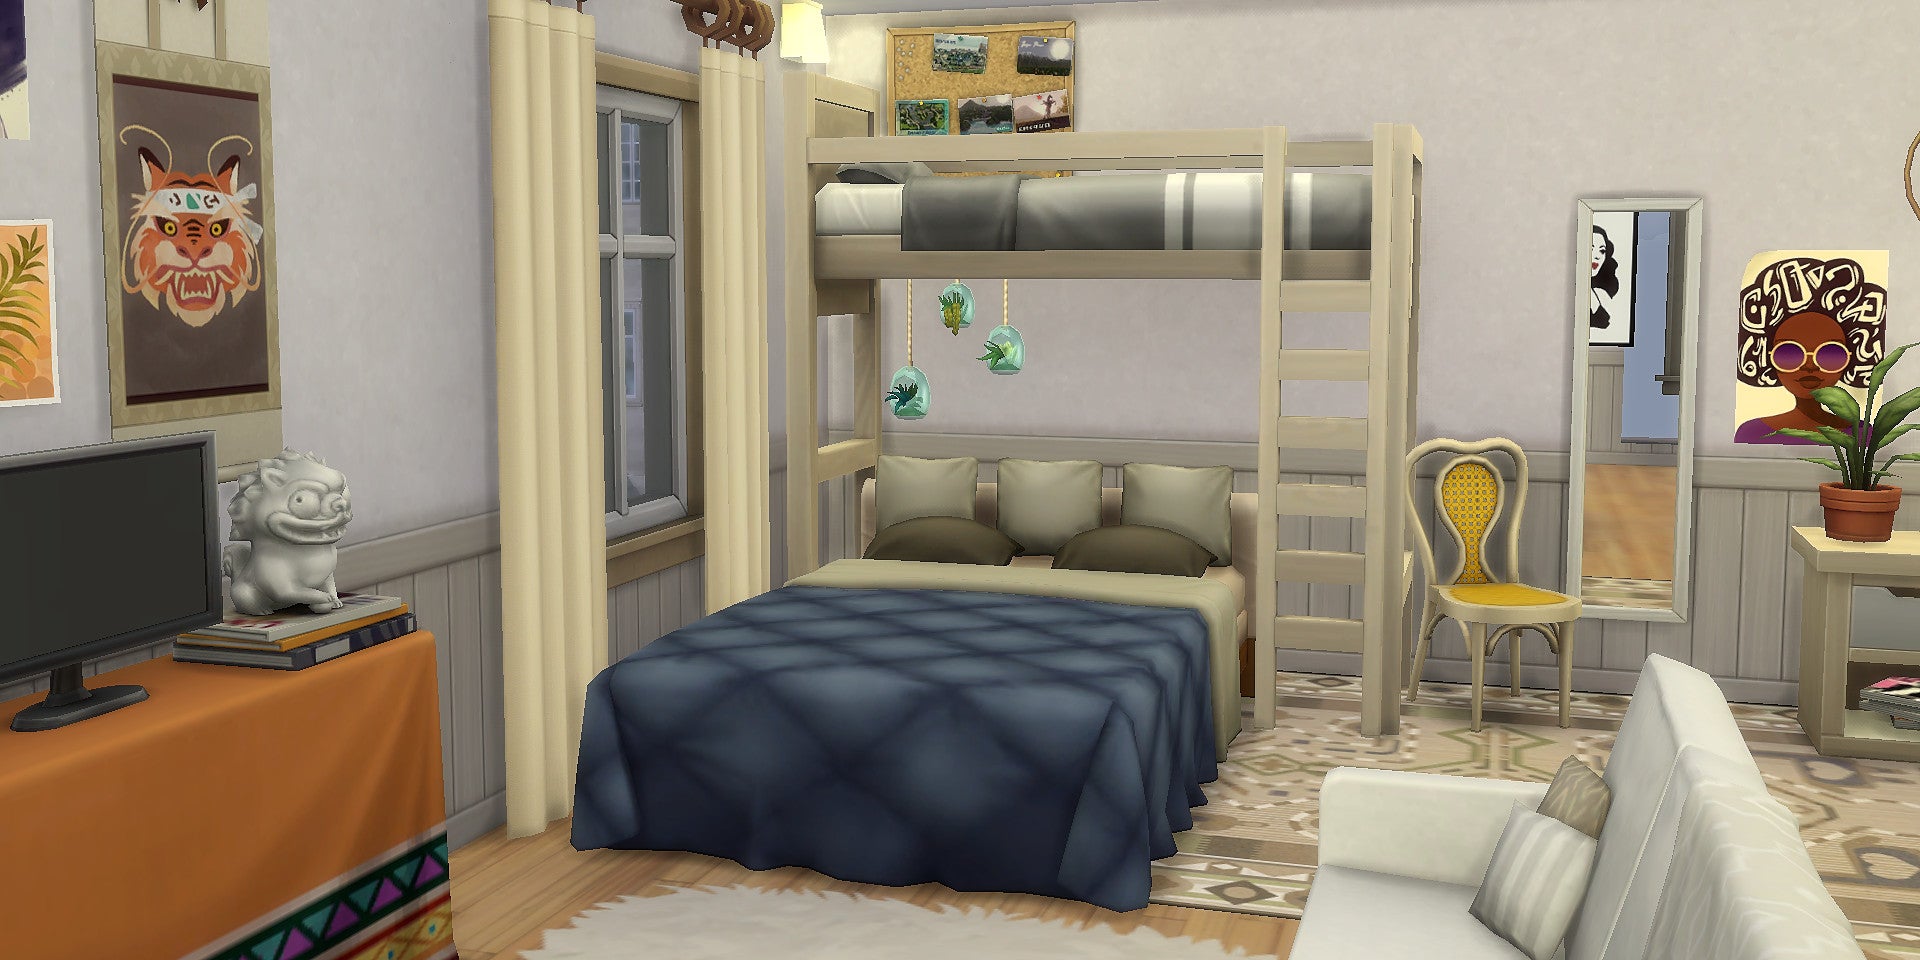 A bed is against the wall in The Sims 4.